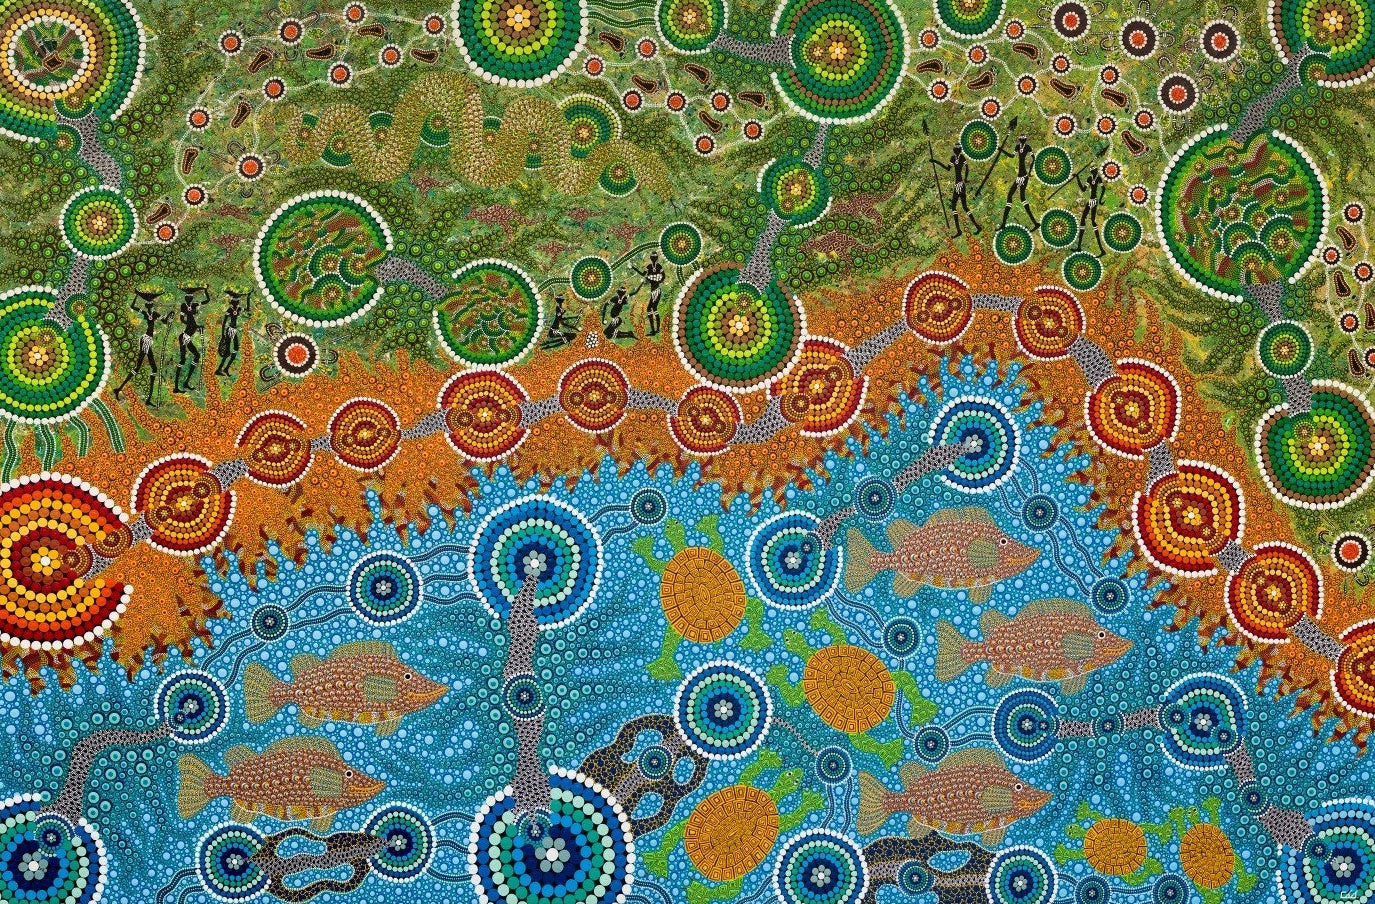 The Art of Carbal | Authentic Indigenous Australian Artwork - Hunters and Gatherers of the Rainforest and Fresh Water